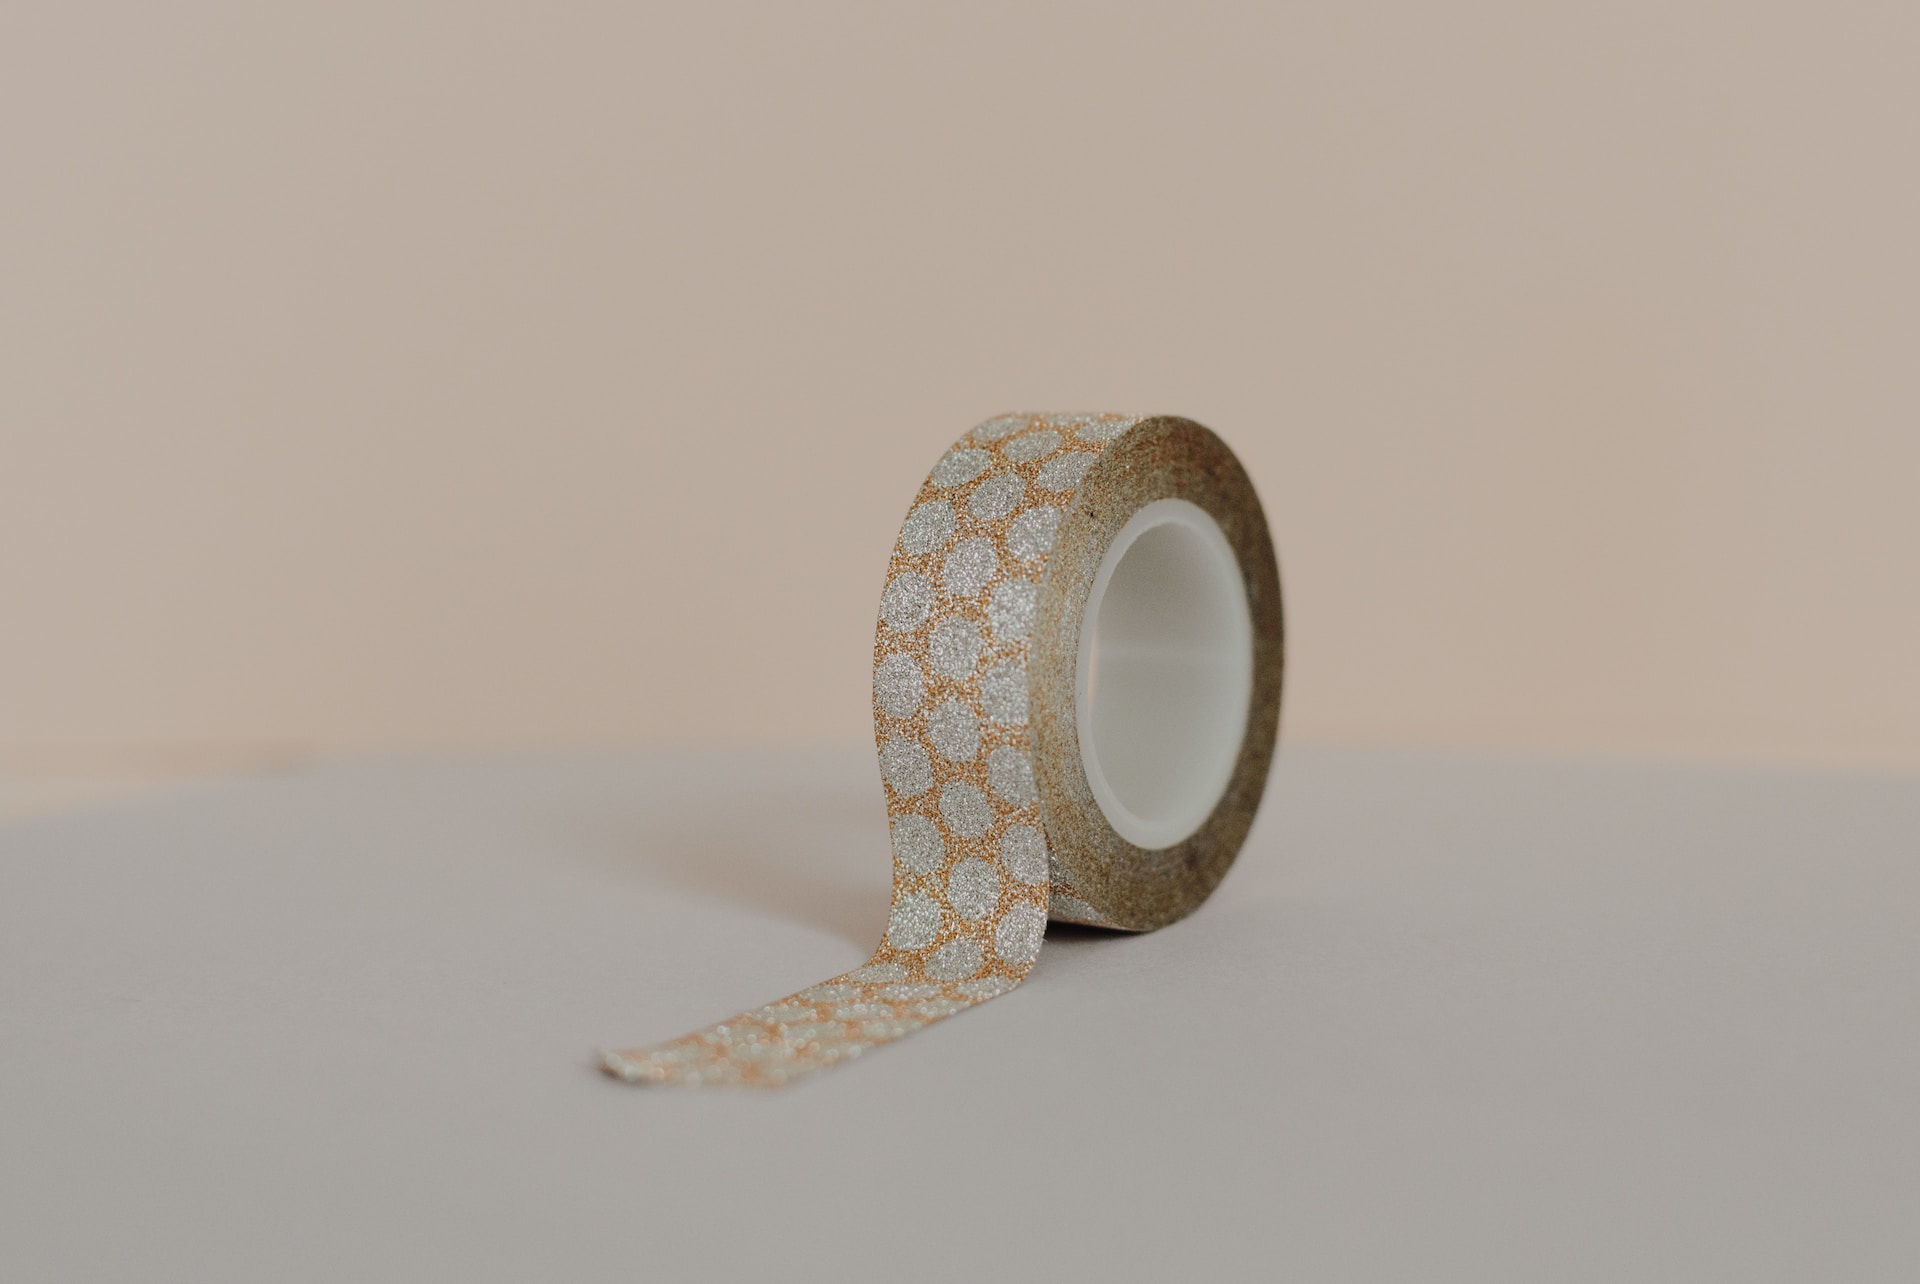 Orange and gray floral tape, with glitter